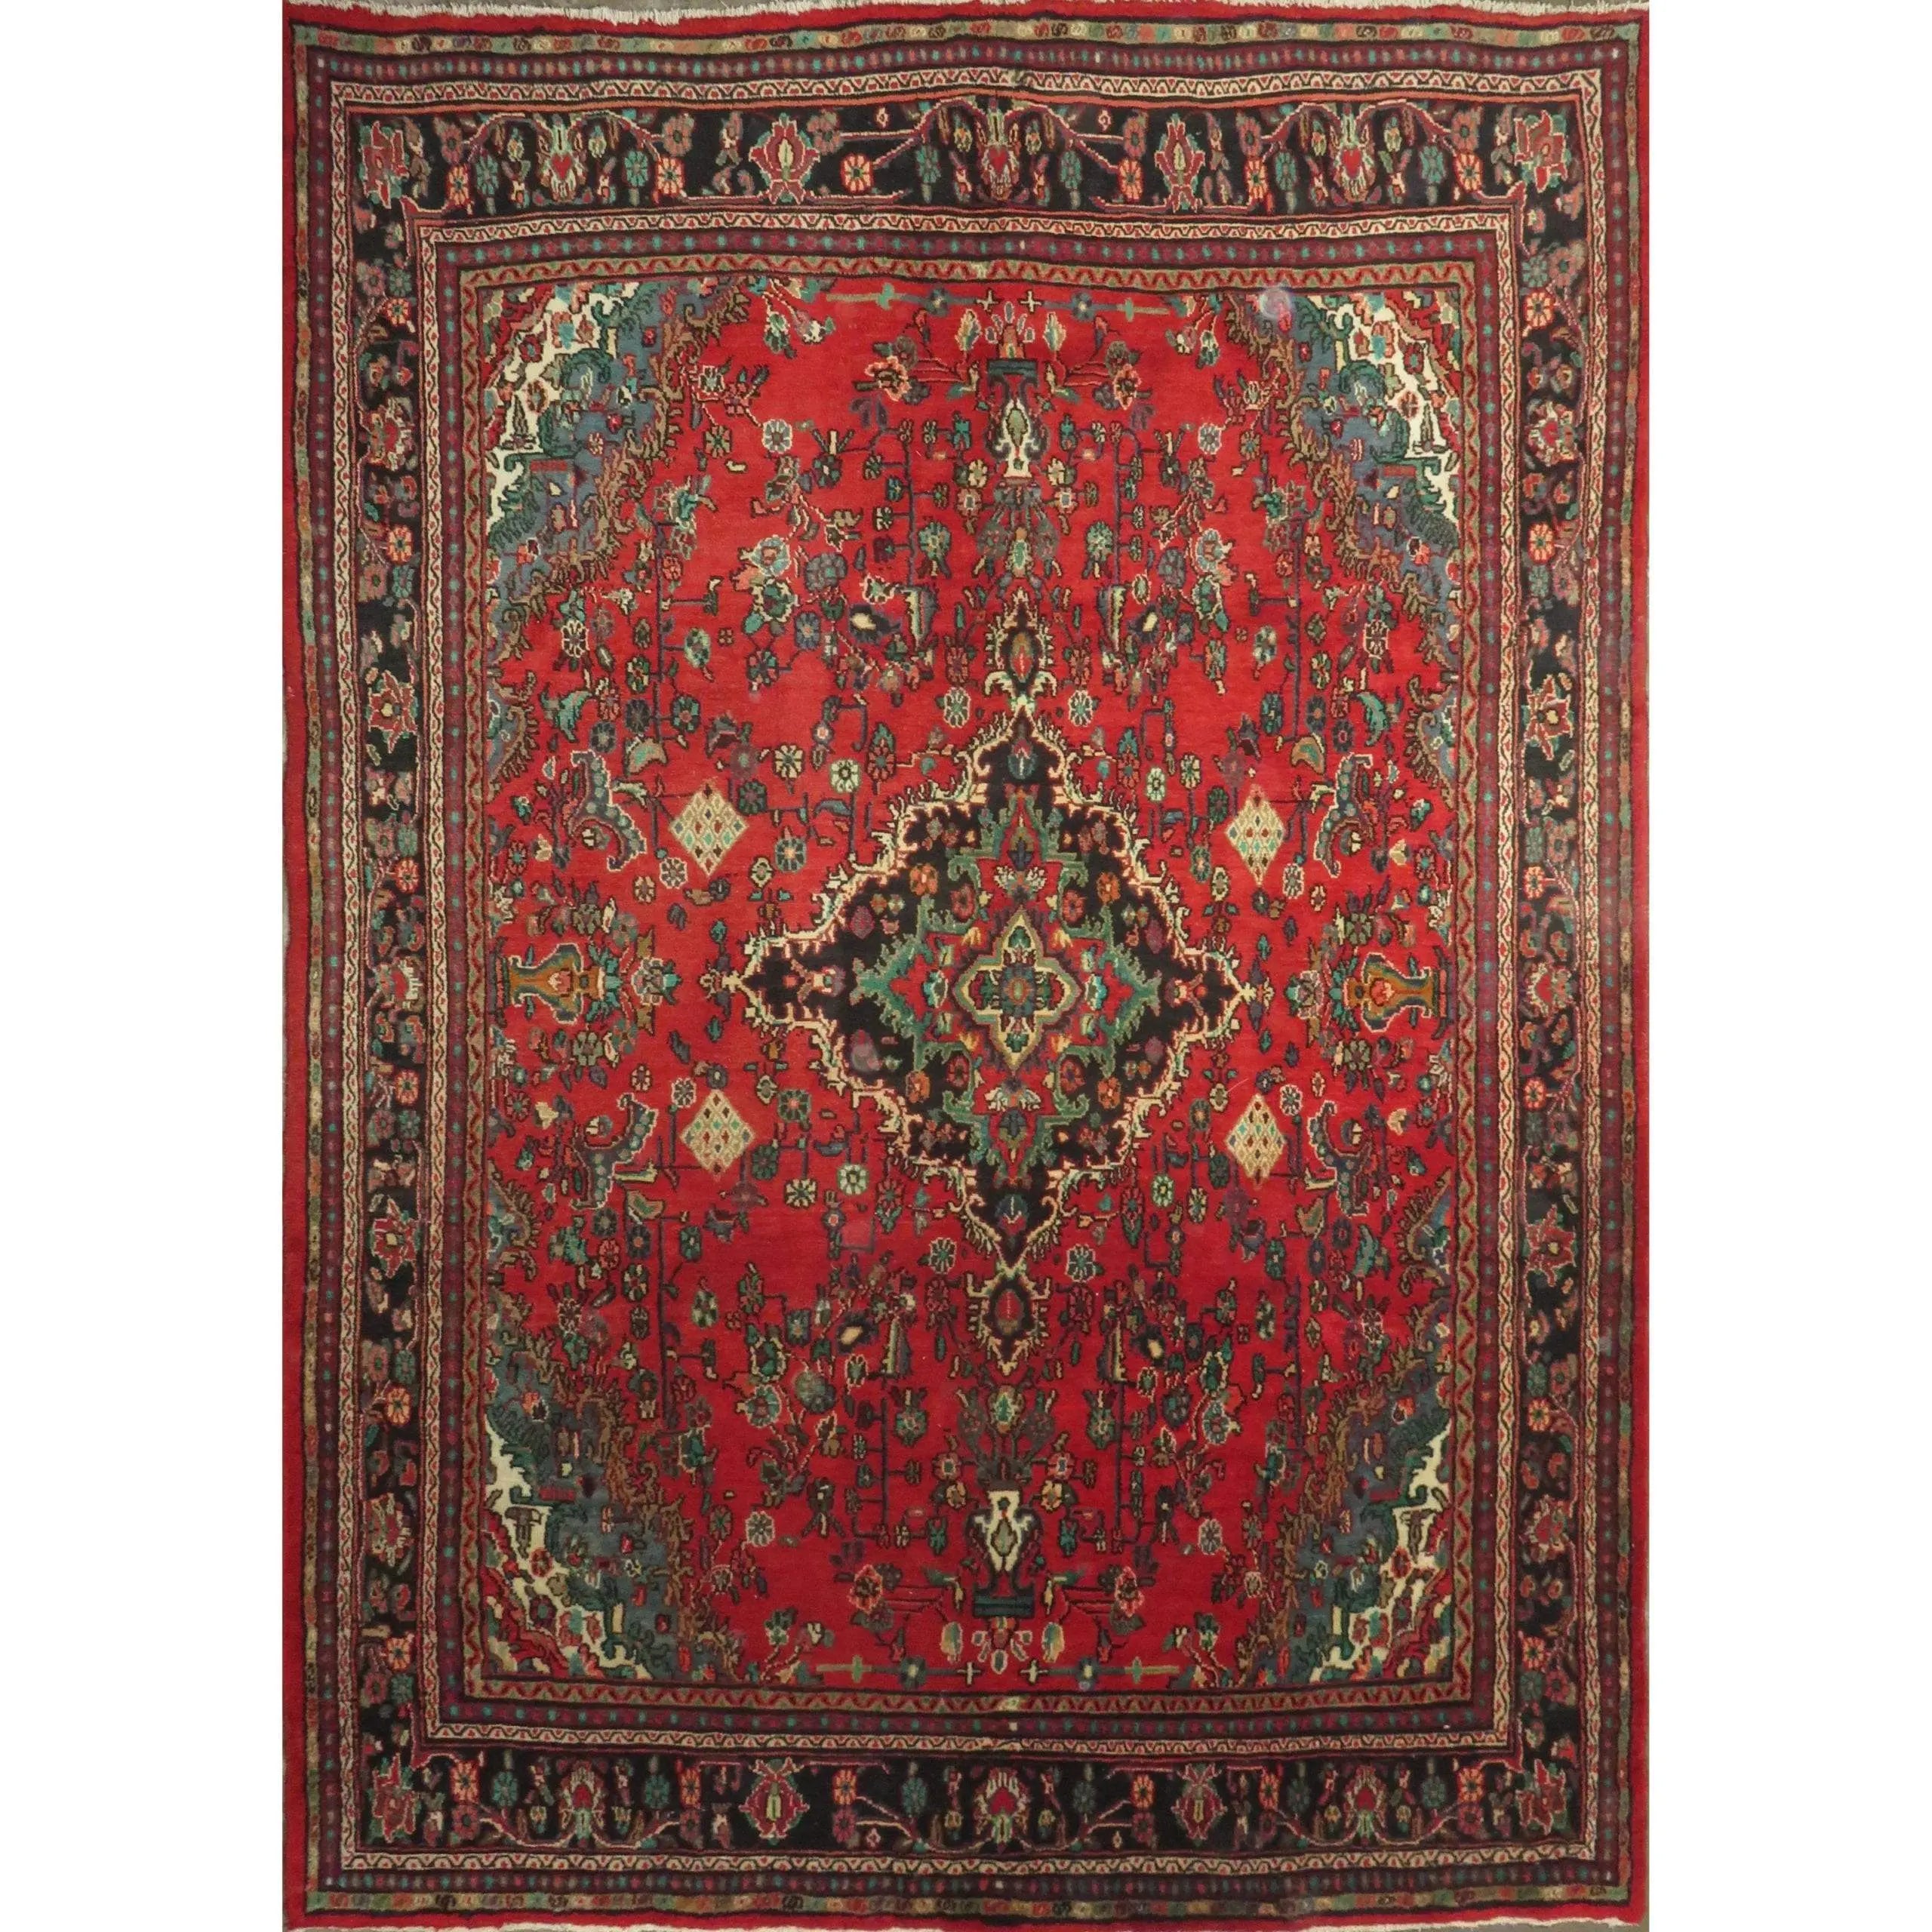 Hand-Knotted Persian Wool Rug _ Luxurious Vintage Design, 12'1" x 7'9", Artisan Crafted